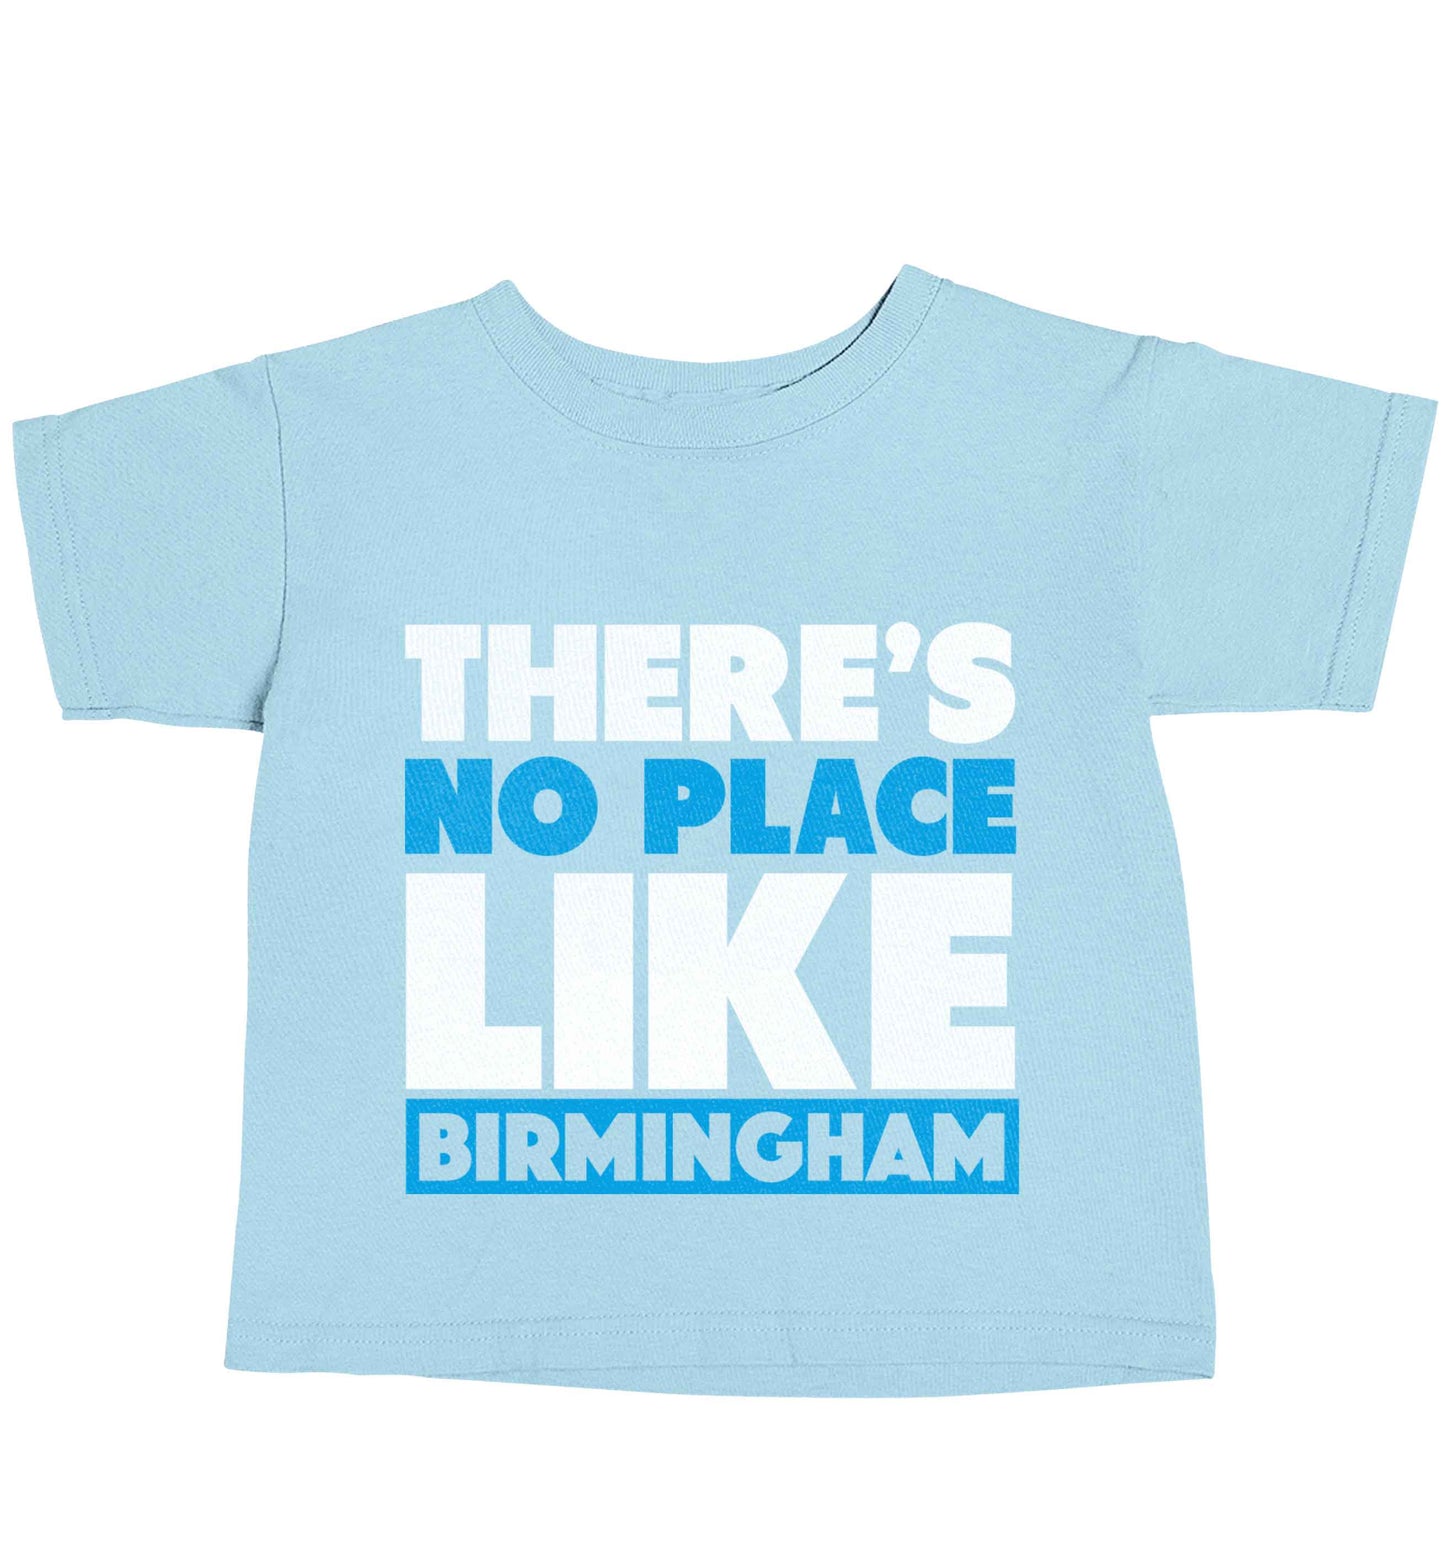 There's no place like Birmingham light blue baby toddler Tshirt 2 Years